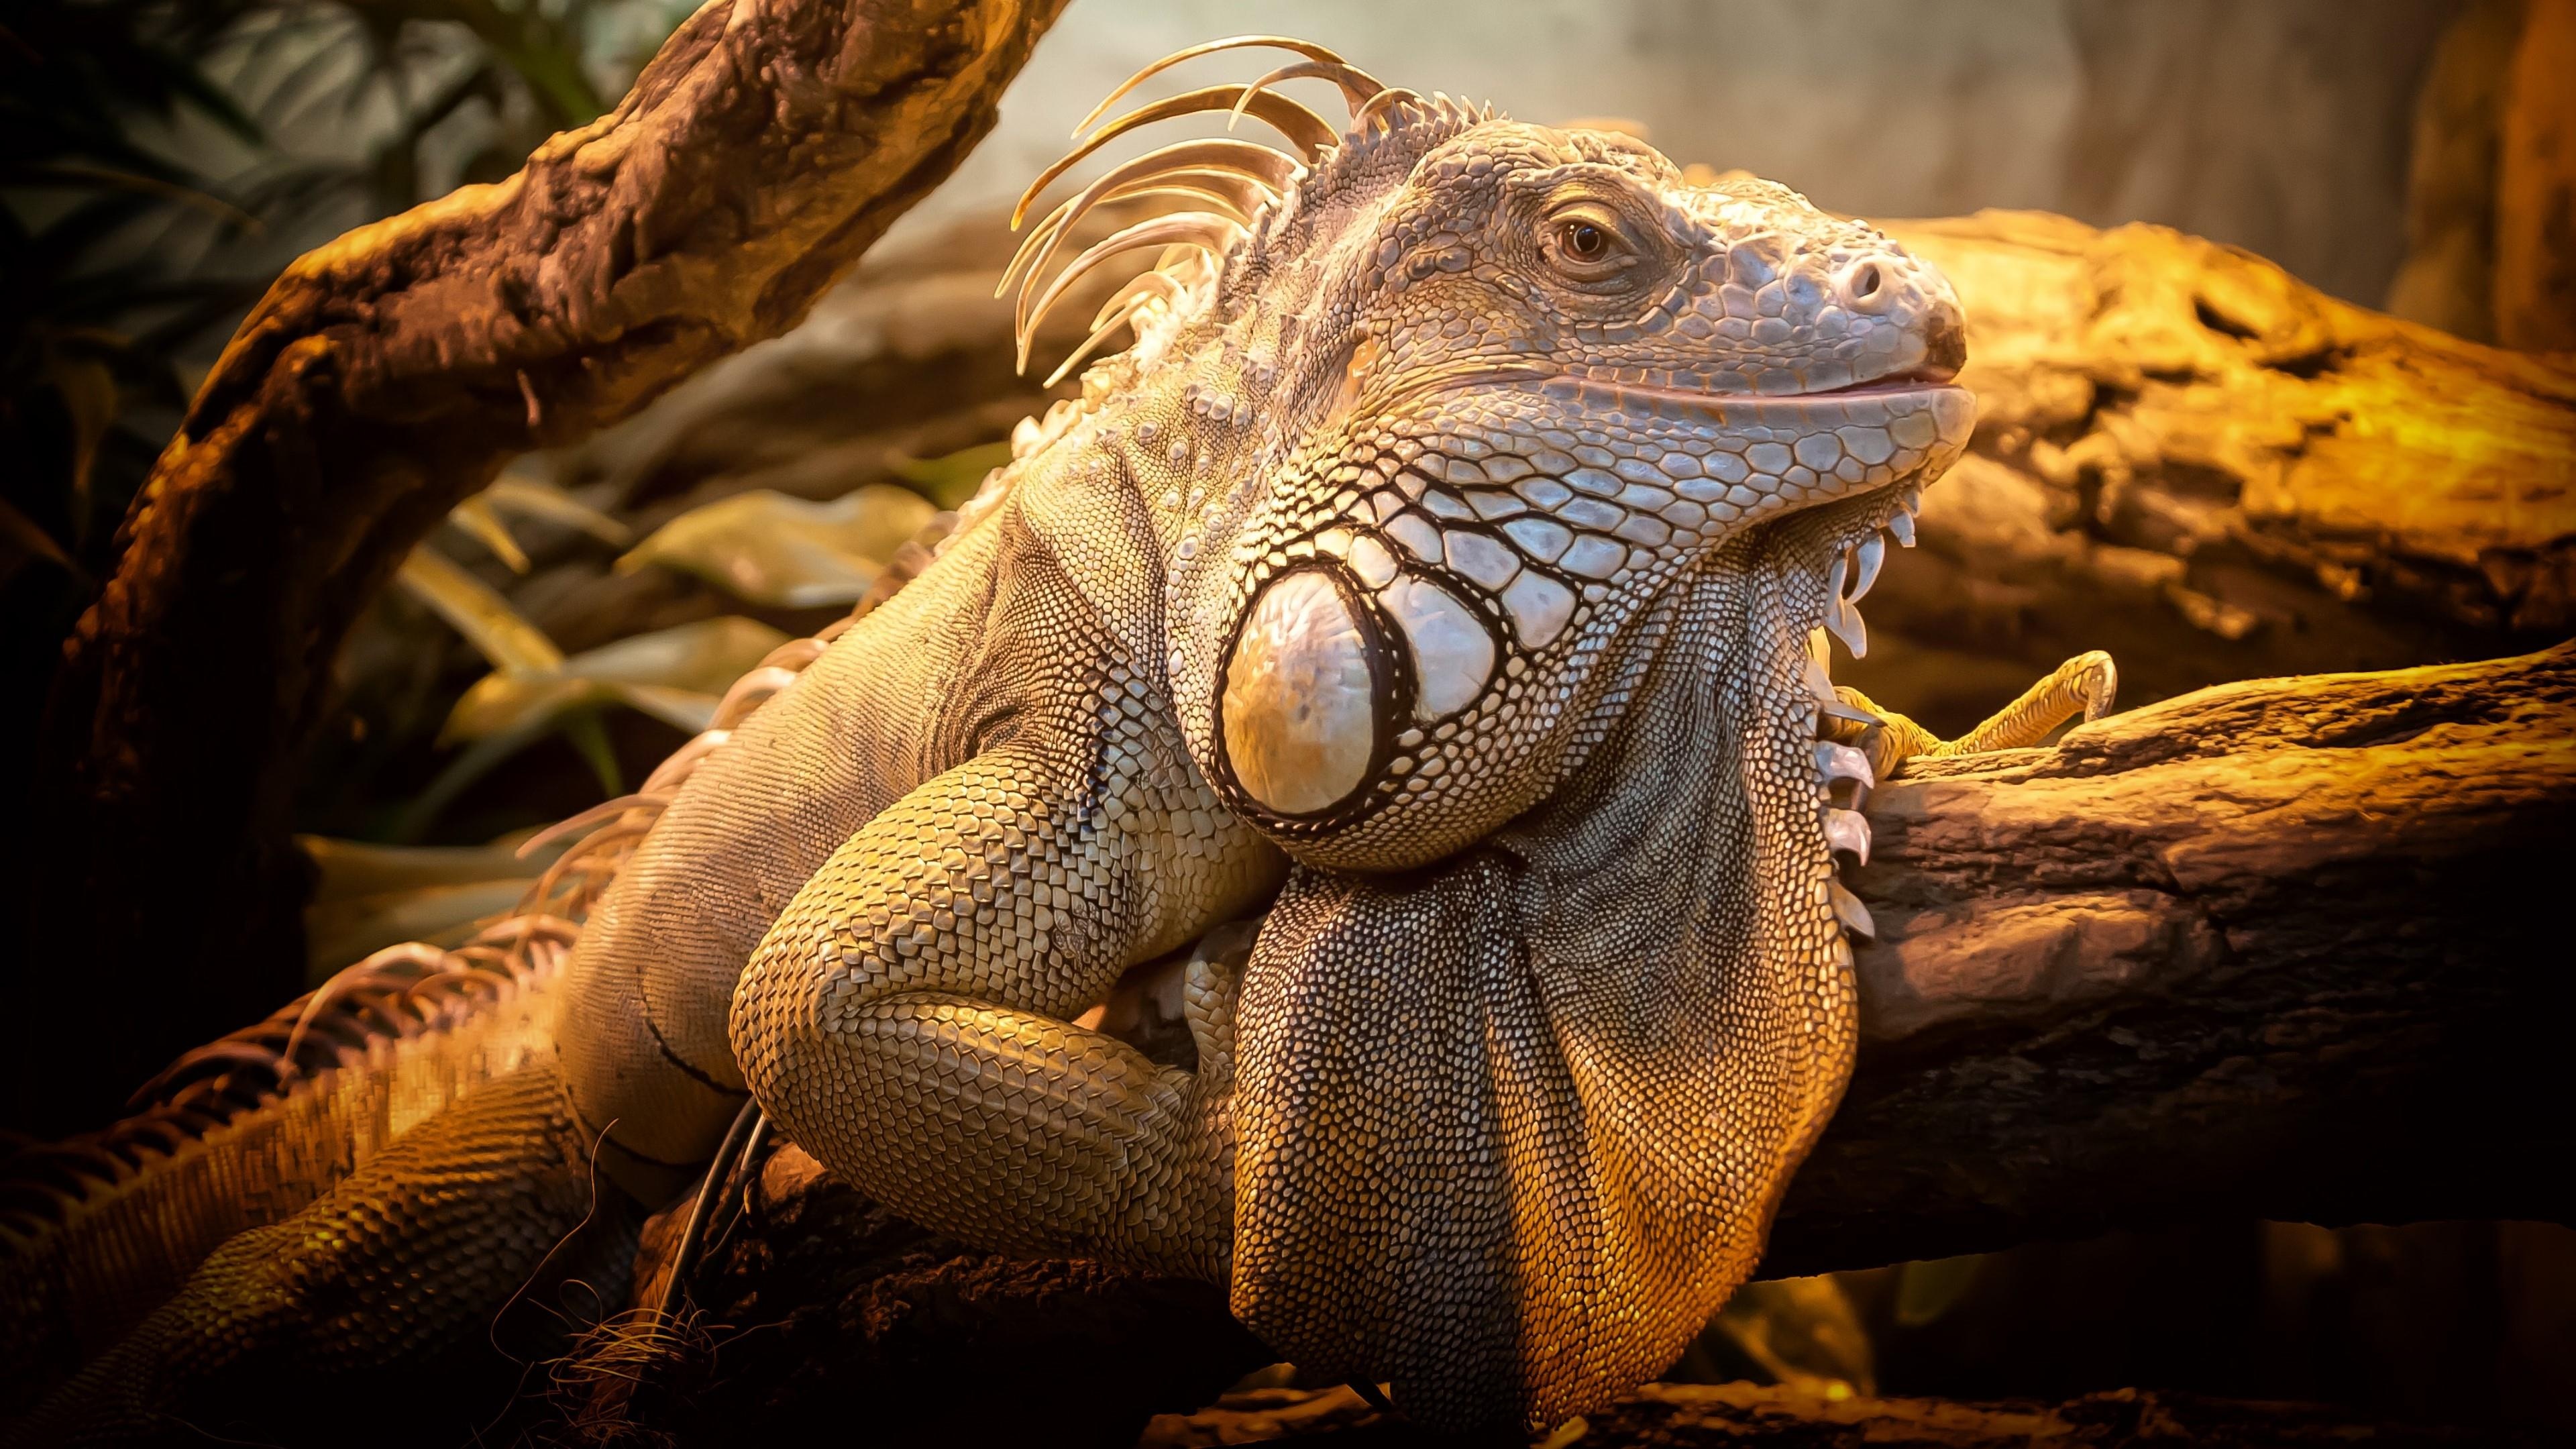 Iguana wallpapers, Stunning reptile, Colorful scales, Nature background, 3840x2160 4K Desktop